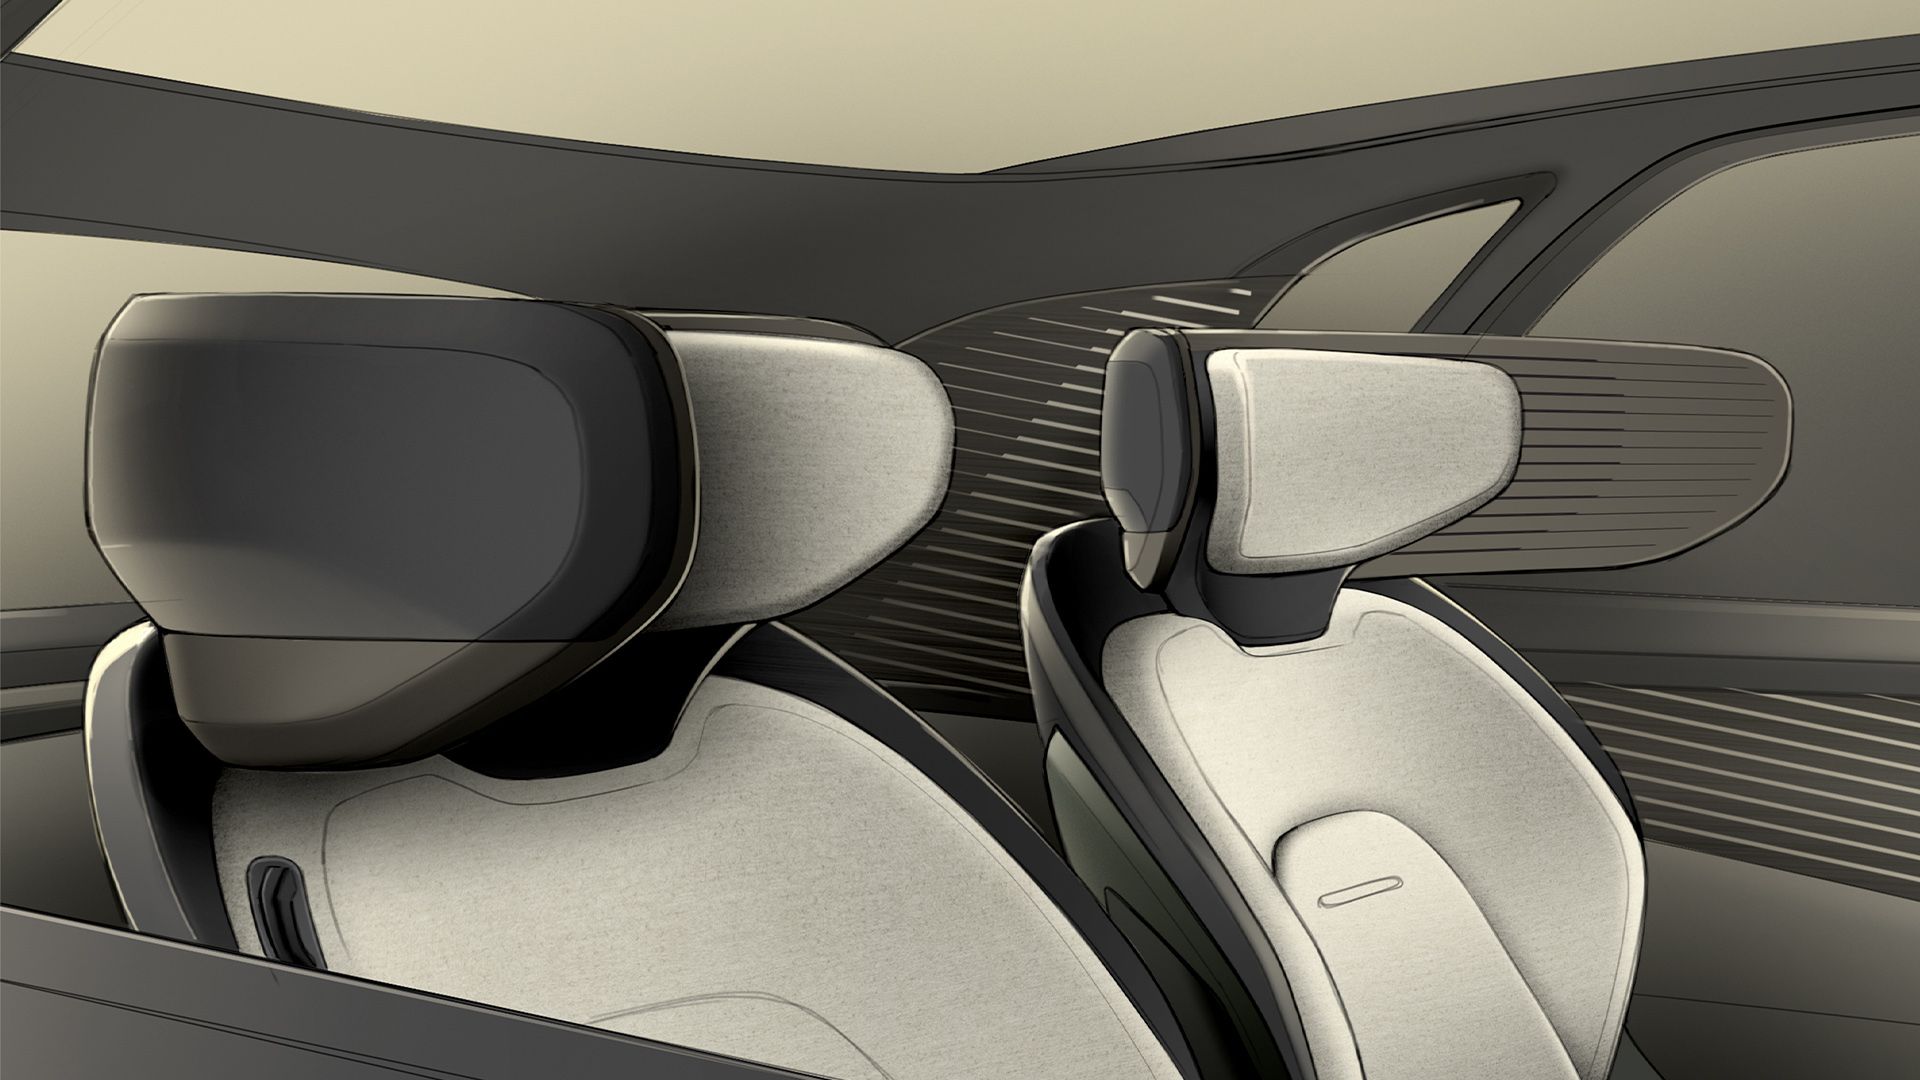 The digital sketch depicts the car seats’ collar elements, which screen occupants off from one another.